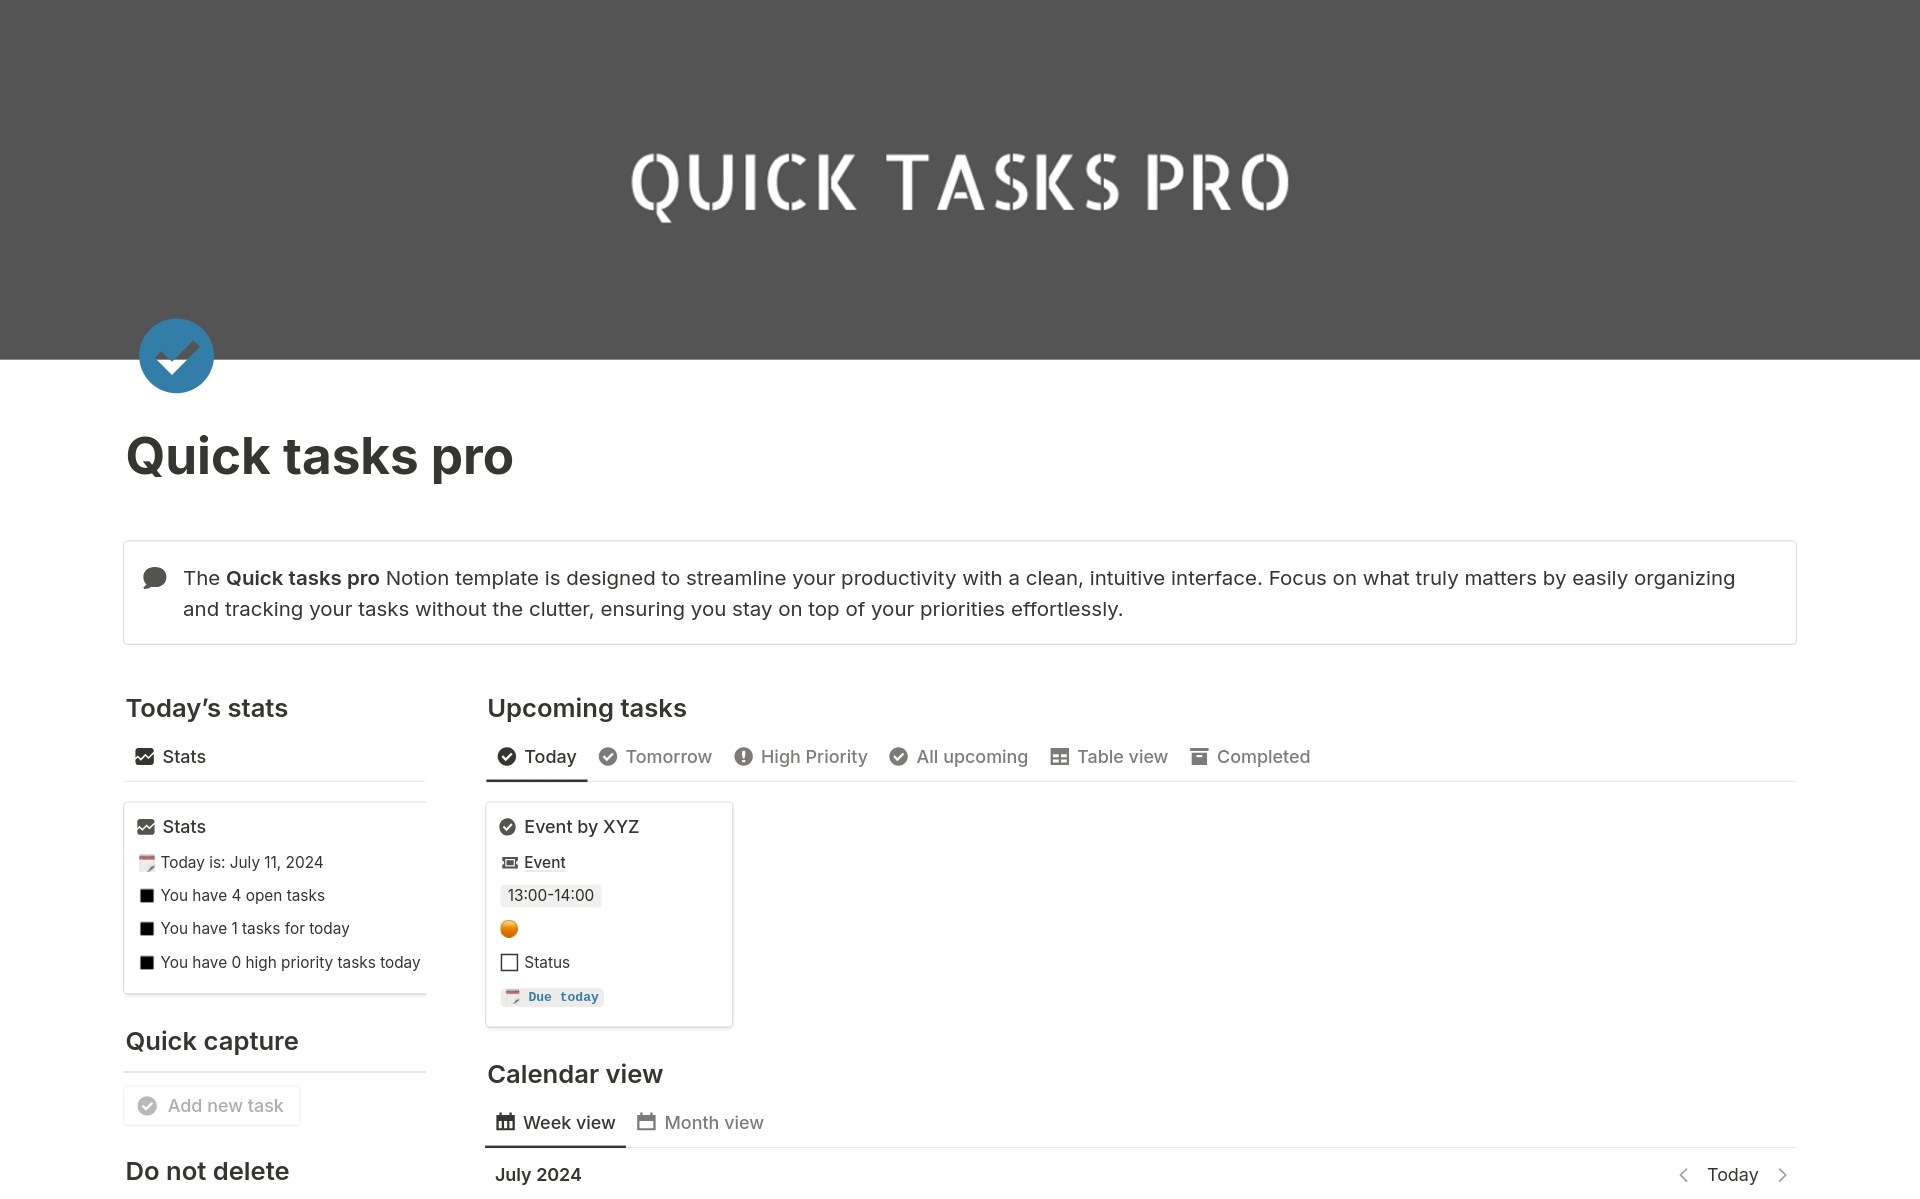 The Quick tasks pro Notion template is designed to streamline your productivity with a clean, intuitive interface. Focus on what truly matters by easily organizing and tracking your tasks without the clutter, ensuring you stay on top of your priorities effortlessly.